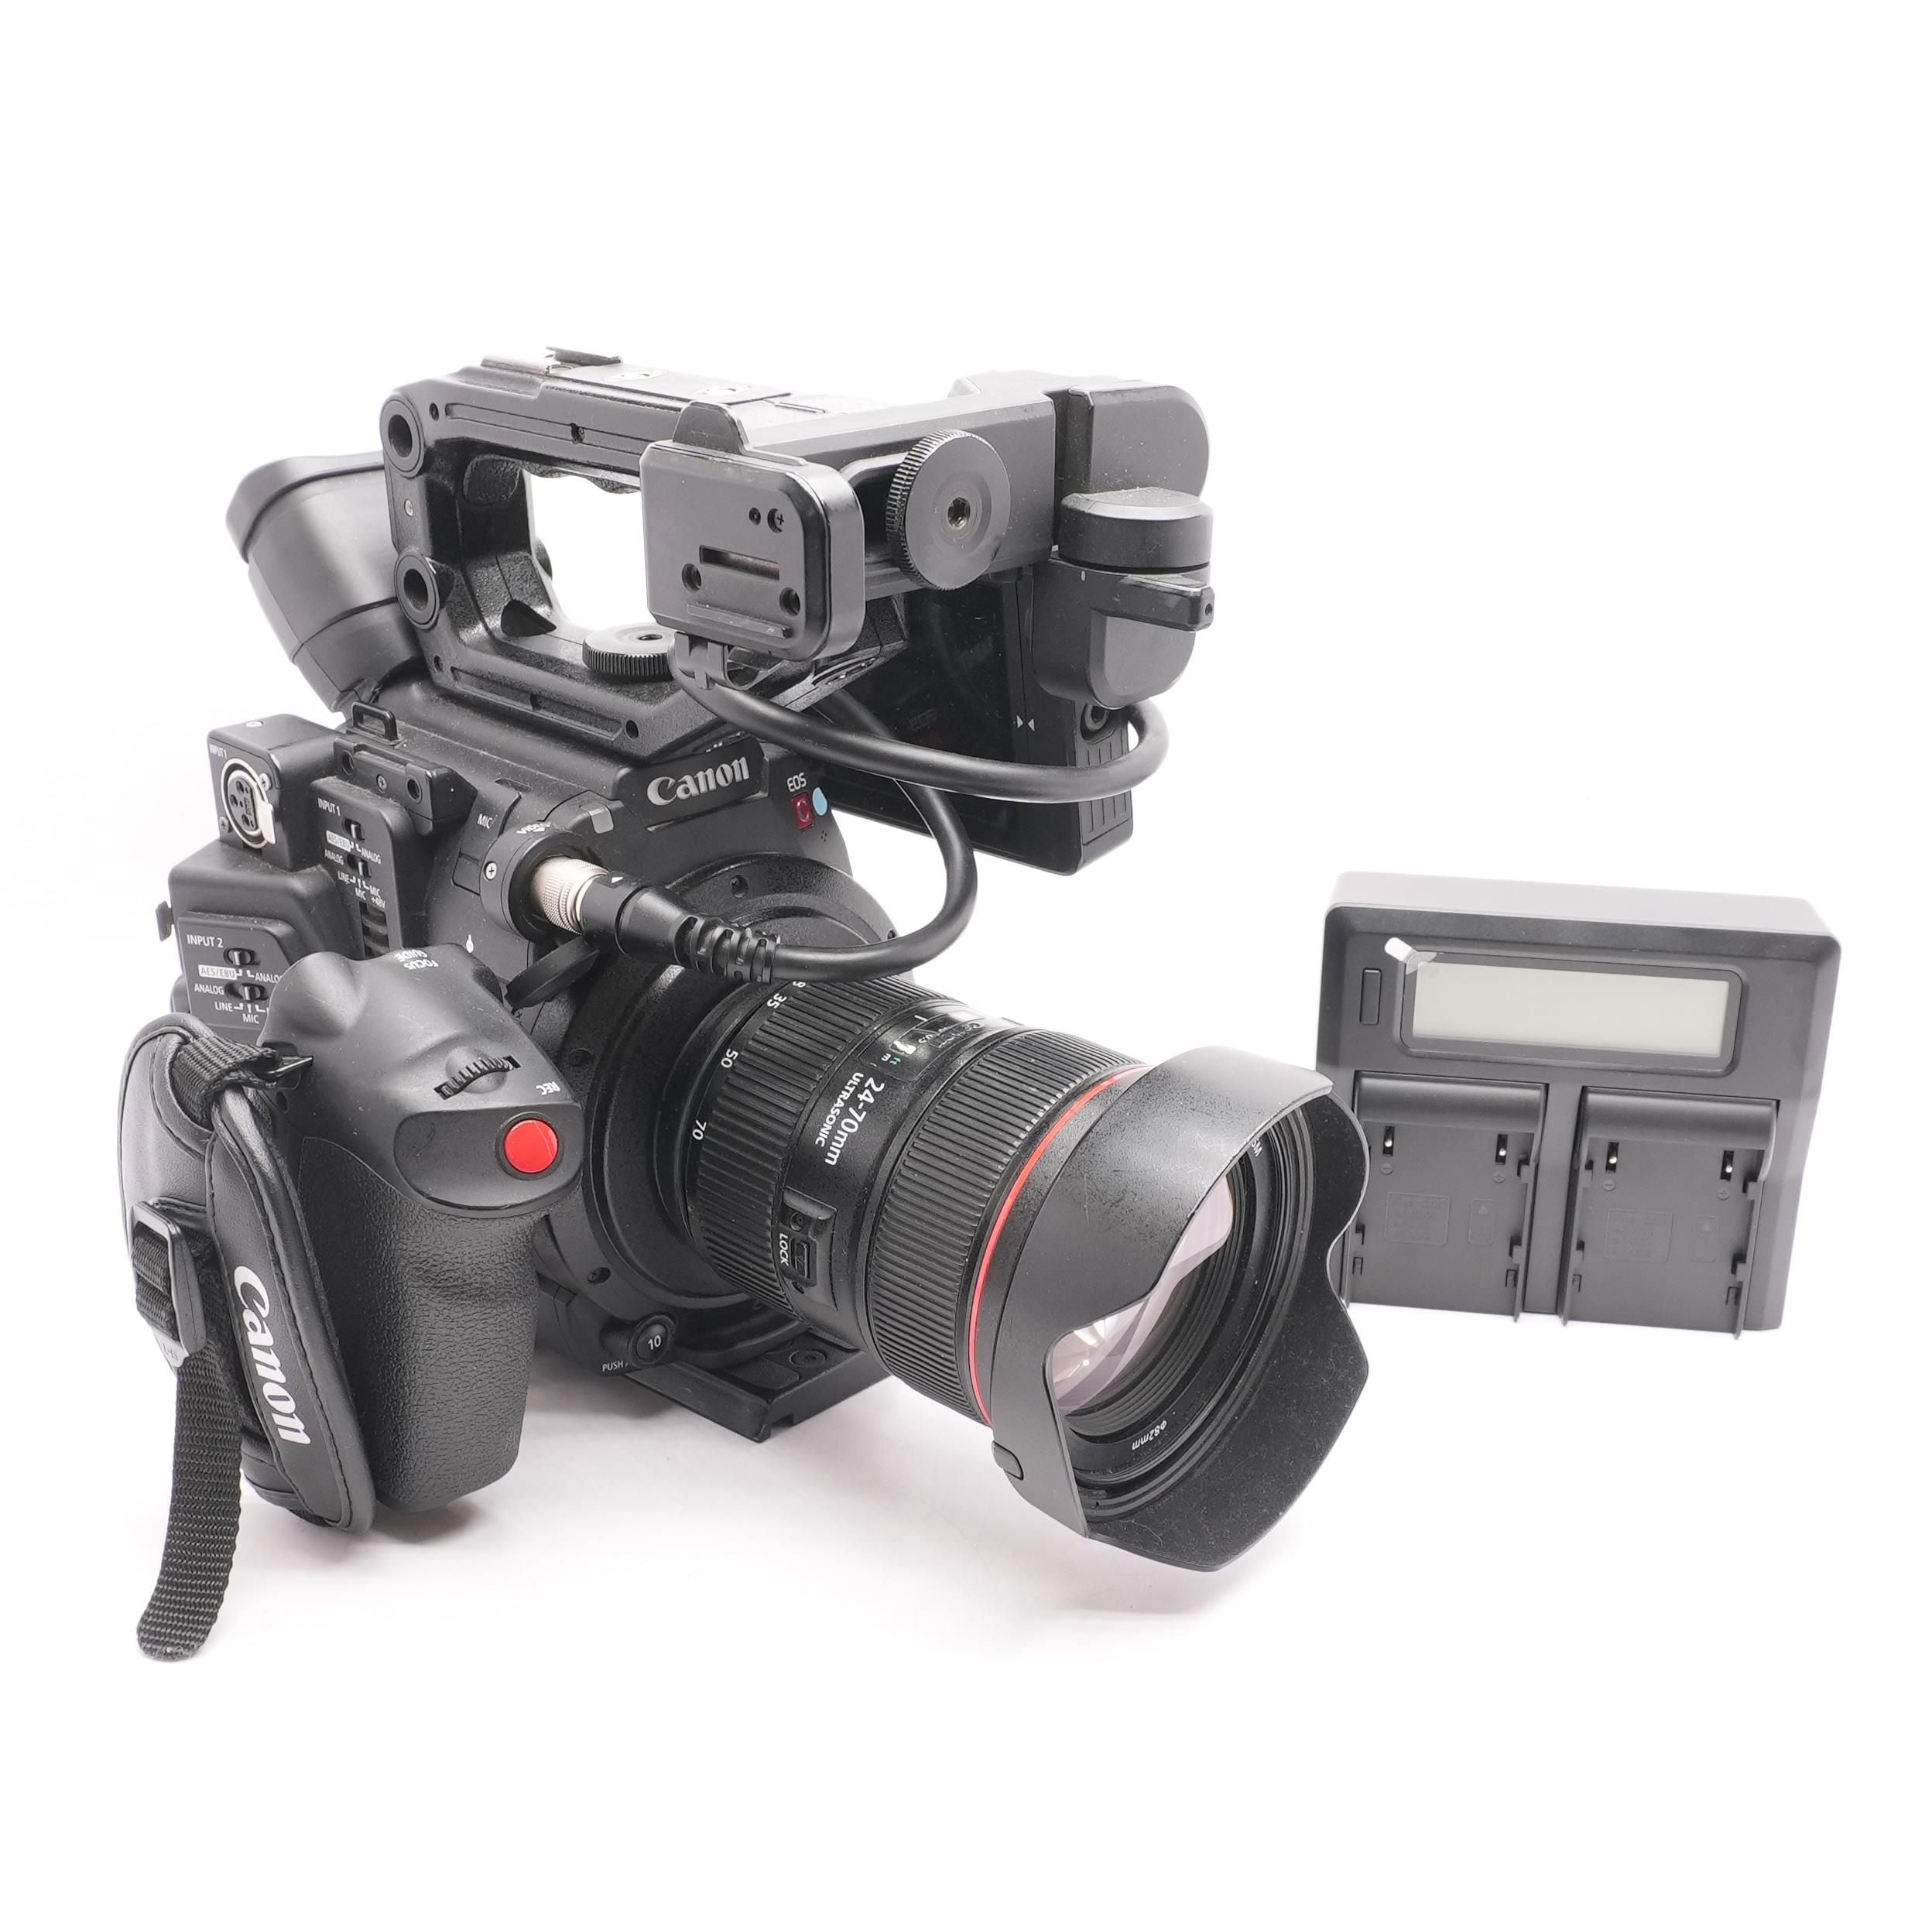 EOS C200 Camcorder with Canon EF 24-70mm f/2.8L II USM Lens